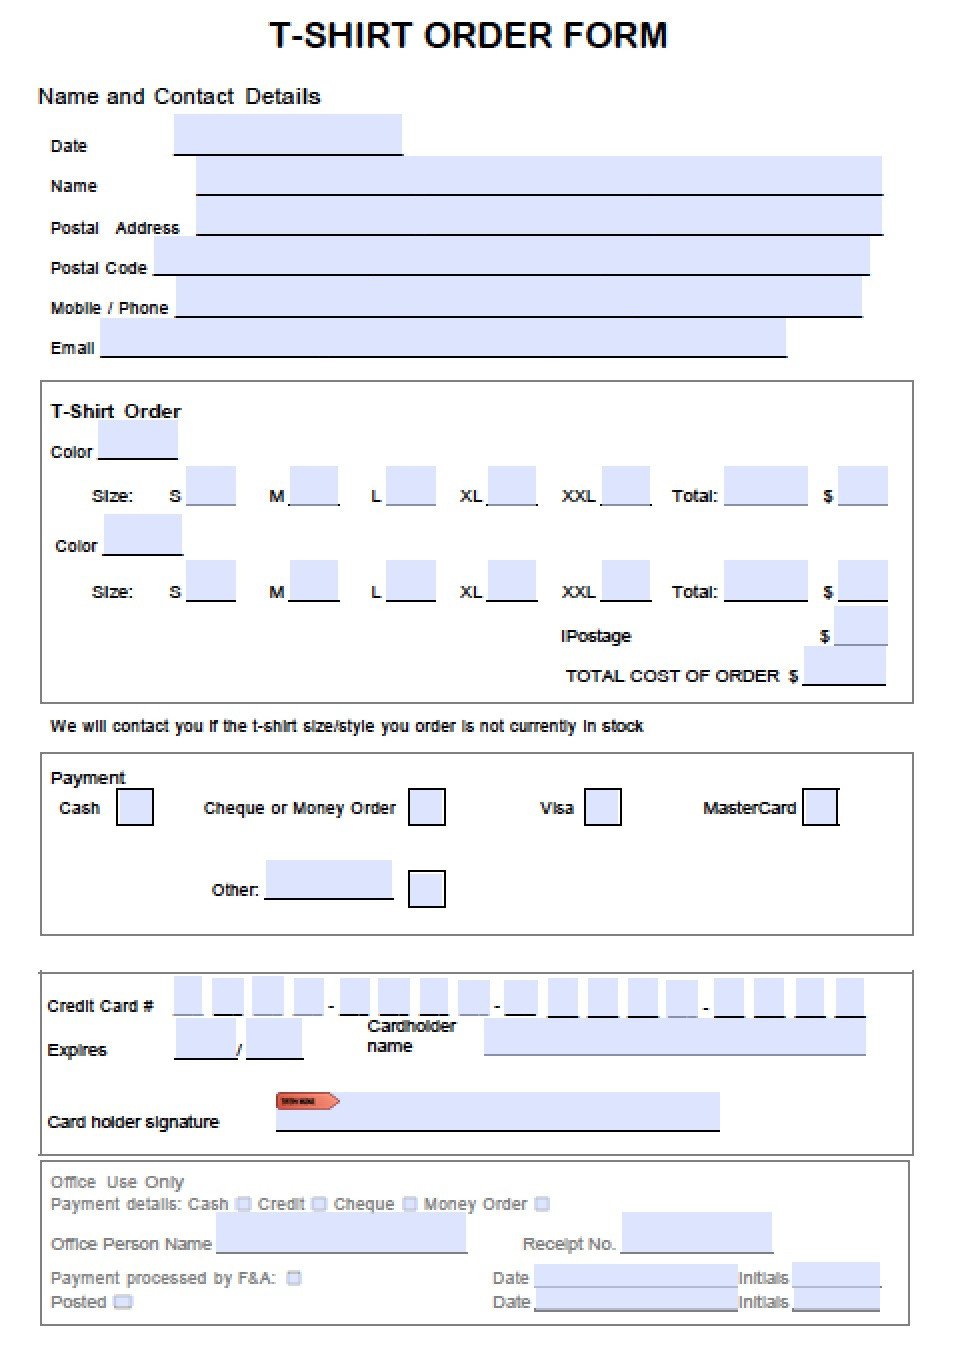 Tshirt order form Template T Shirt order form Template